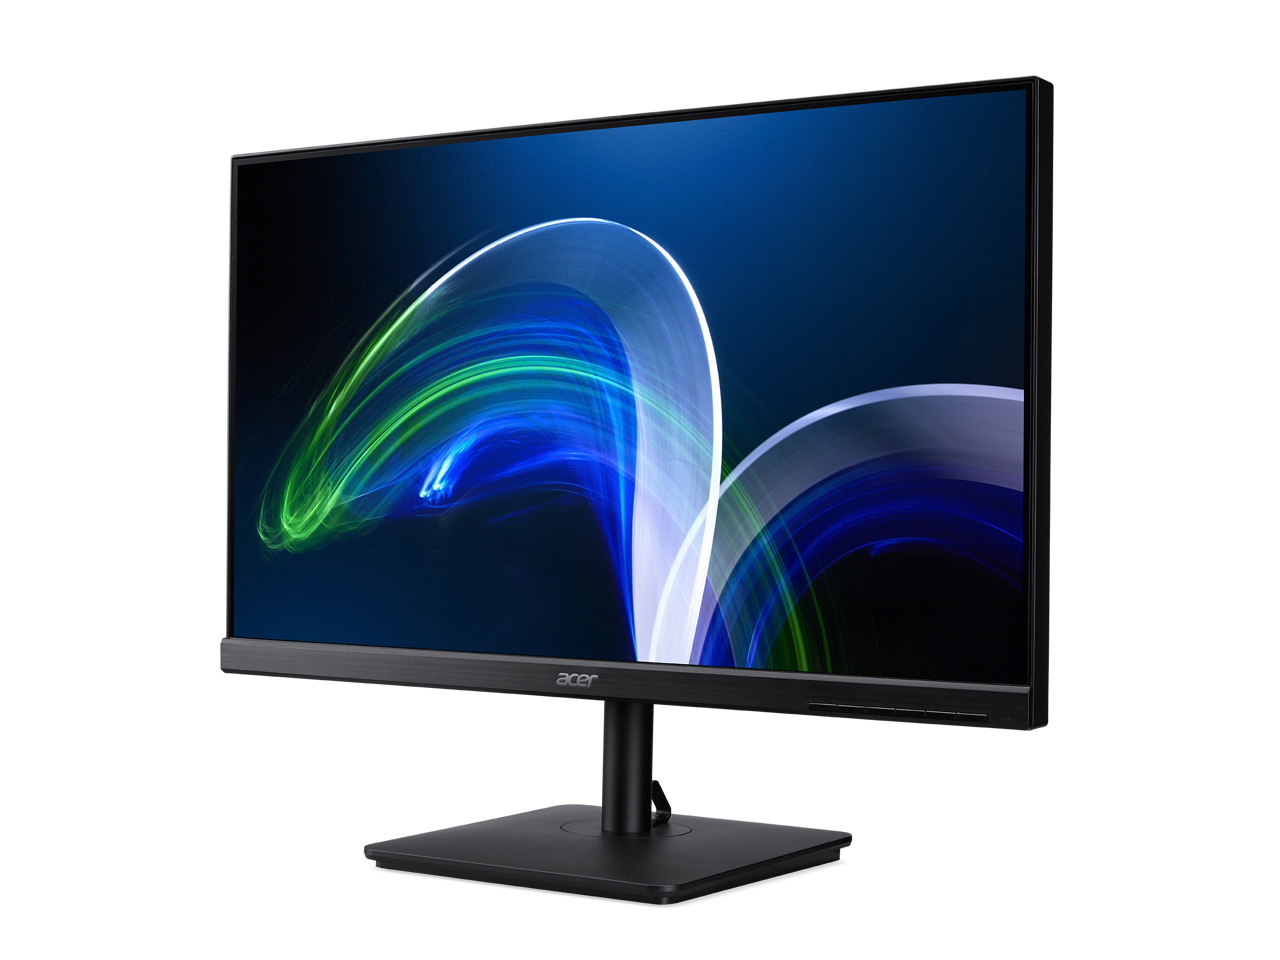 Acer VA241Y 24" (23.8" Viewable) Full HD LED LCD Monitor - 16:9 - Black - Vertical Alignment (VA) - 1920 x 1080 - 16.7 Million Colors - 250 Nit - 4 ms - 75 Hz Refresh Rate - HDMI - VGA - image 5 of 9